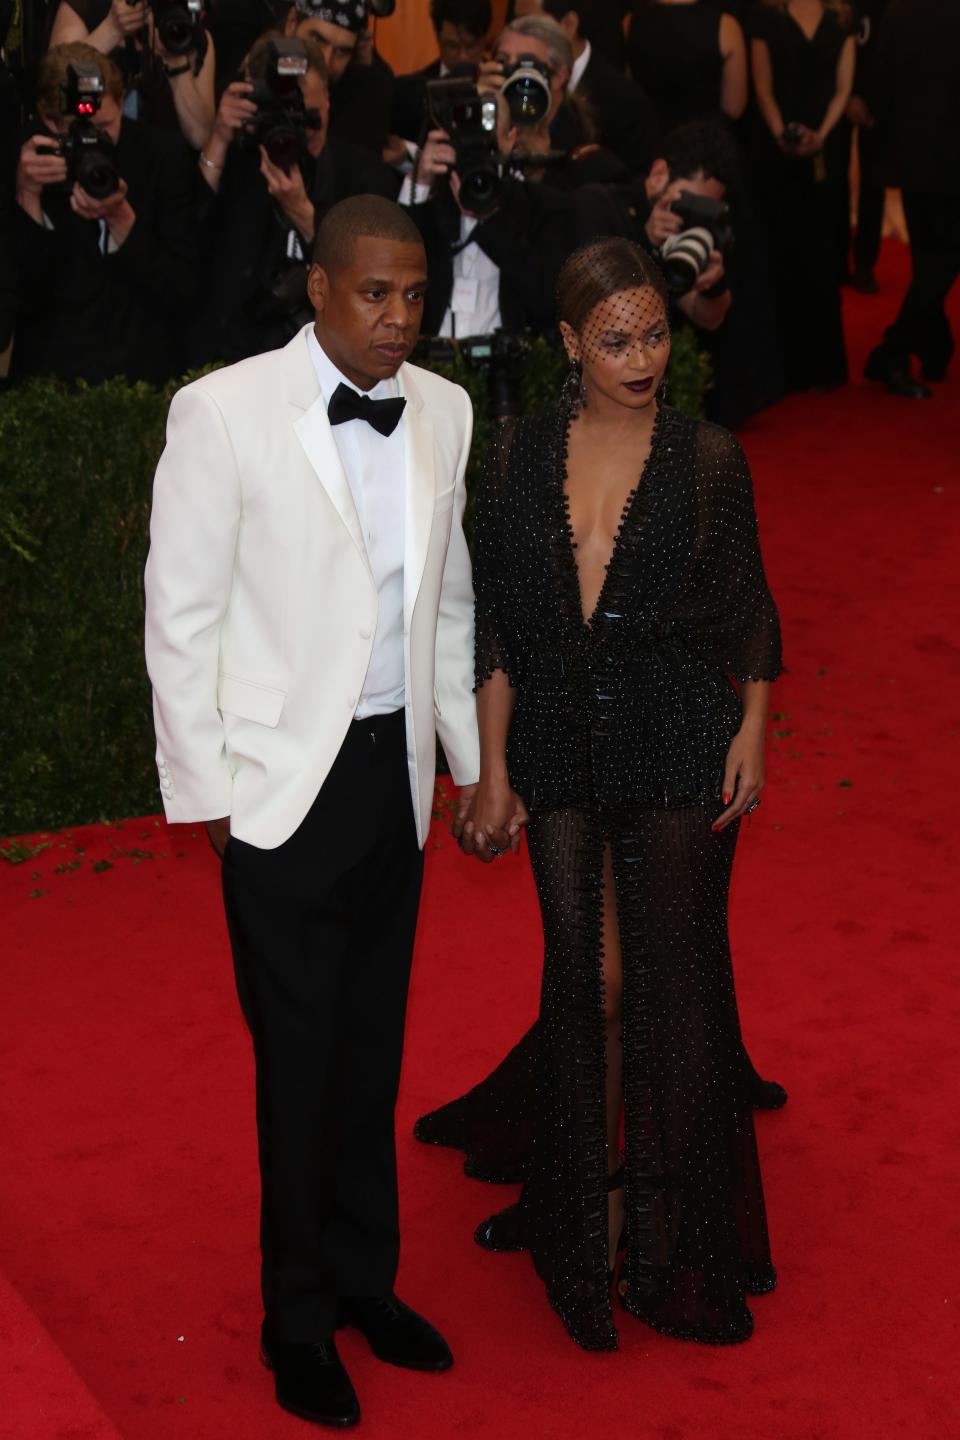 Beyonce and her husband on the red carpet